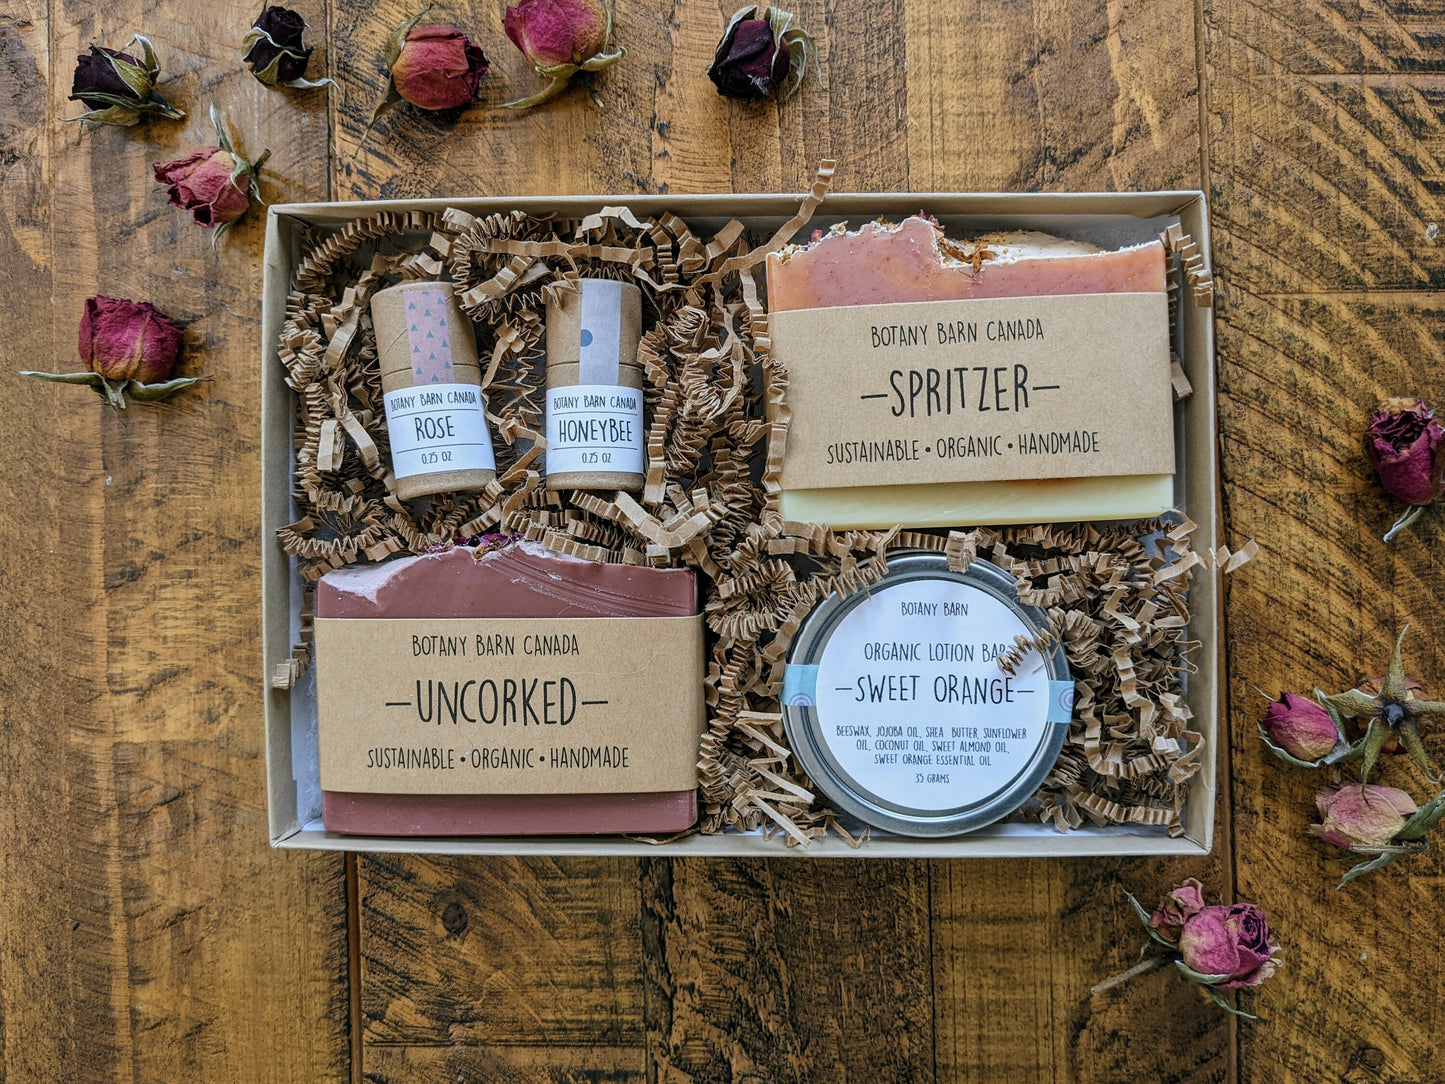 Sustainable Gift Set with 2 Natural Soaps, 2 Eco Friendly Lip Balm, 1 Organic Lotion Bar